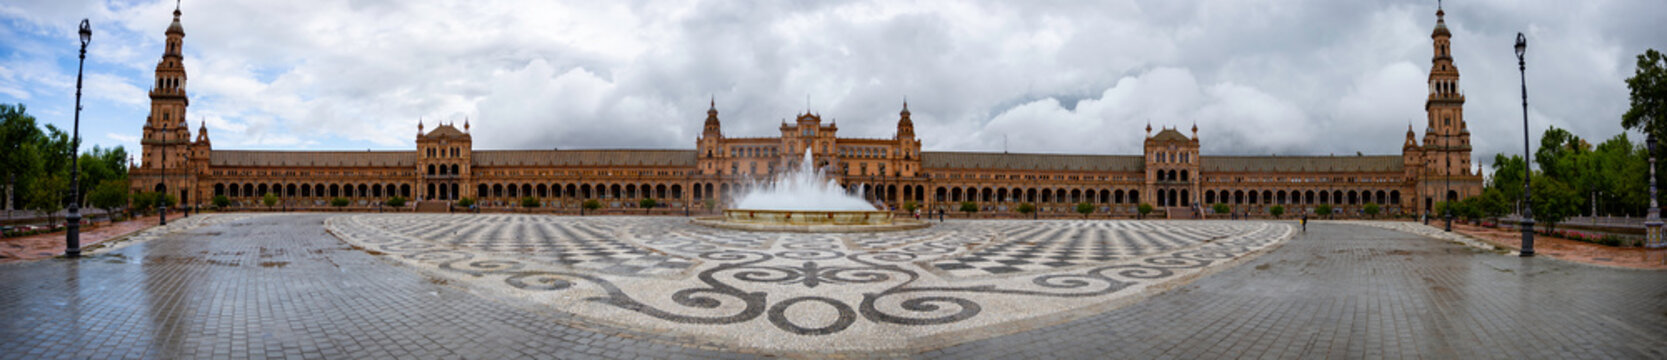 Plaza de Espana in Seville is a perfectly semi circle construct that I captured in this panorama from its equidistant center giving this picture the illusion of a flat building.